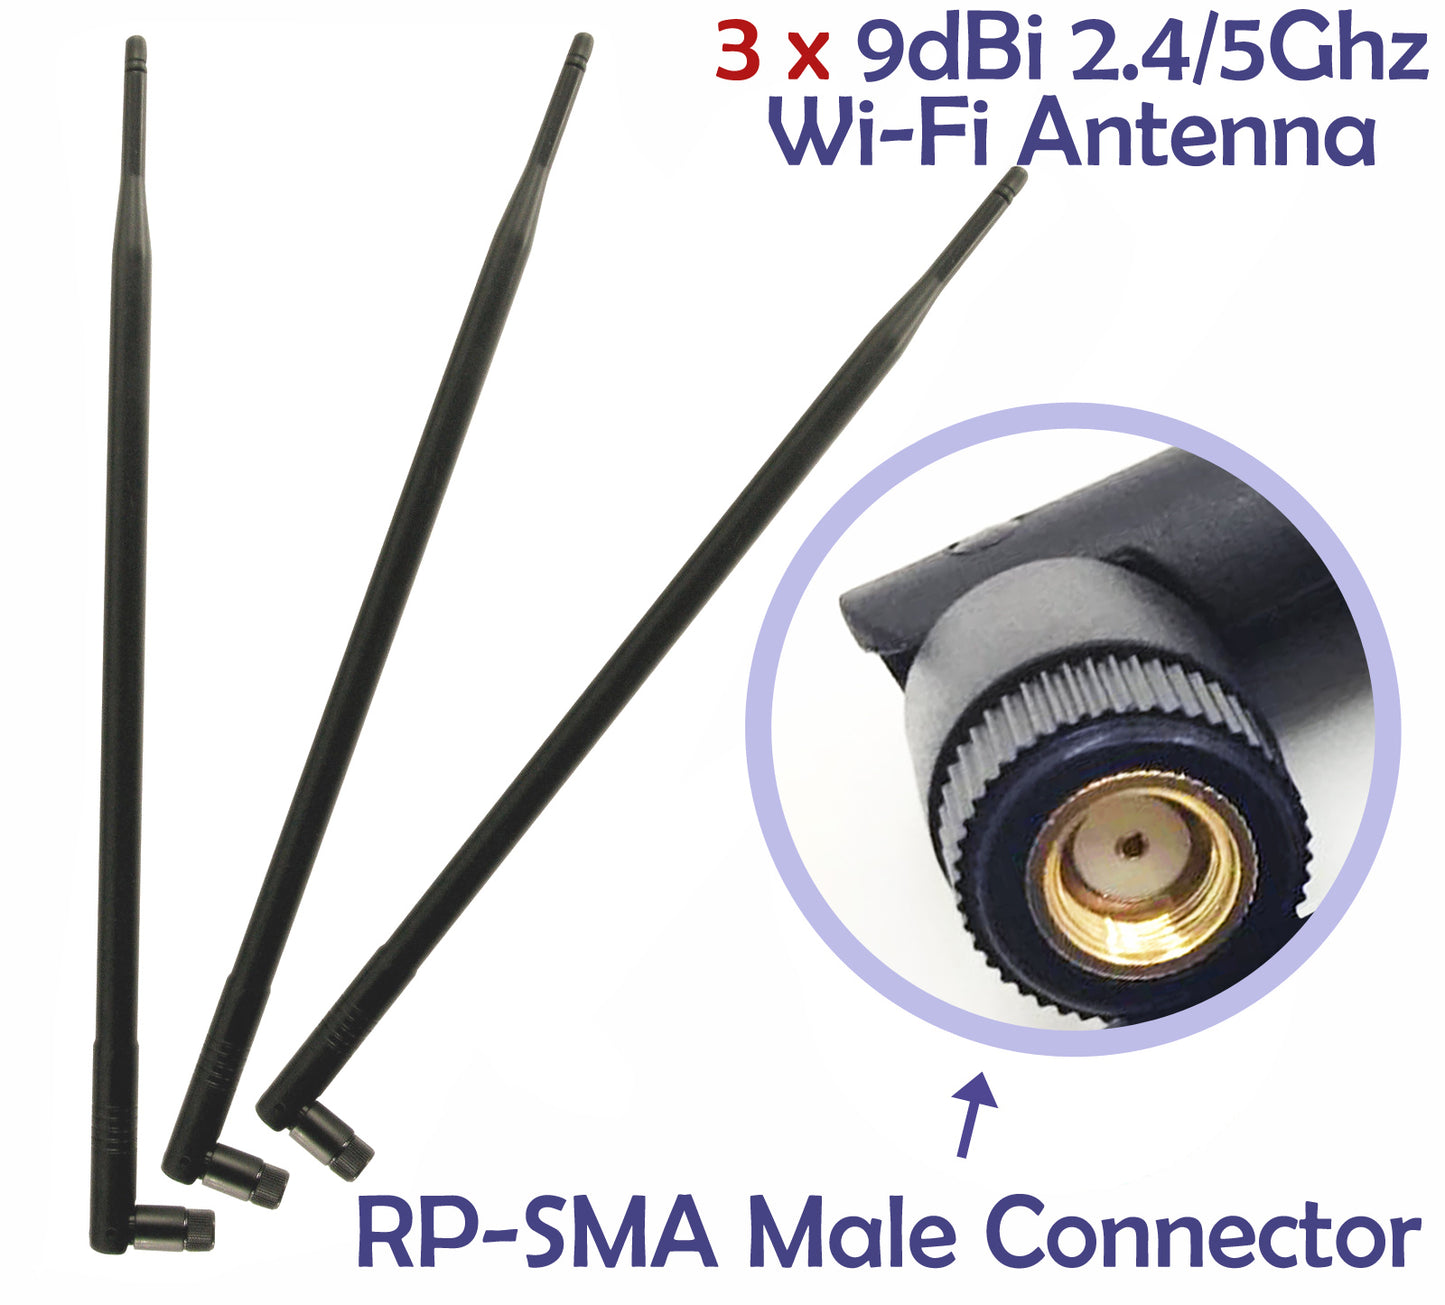 3 WiFi 9dBi Dual Band Omni Directional Antenna 2.4Ghz/5Ghz with RP-SMA Male Connector for Wireless Wi-Fi Router and Network Devices